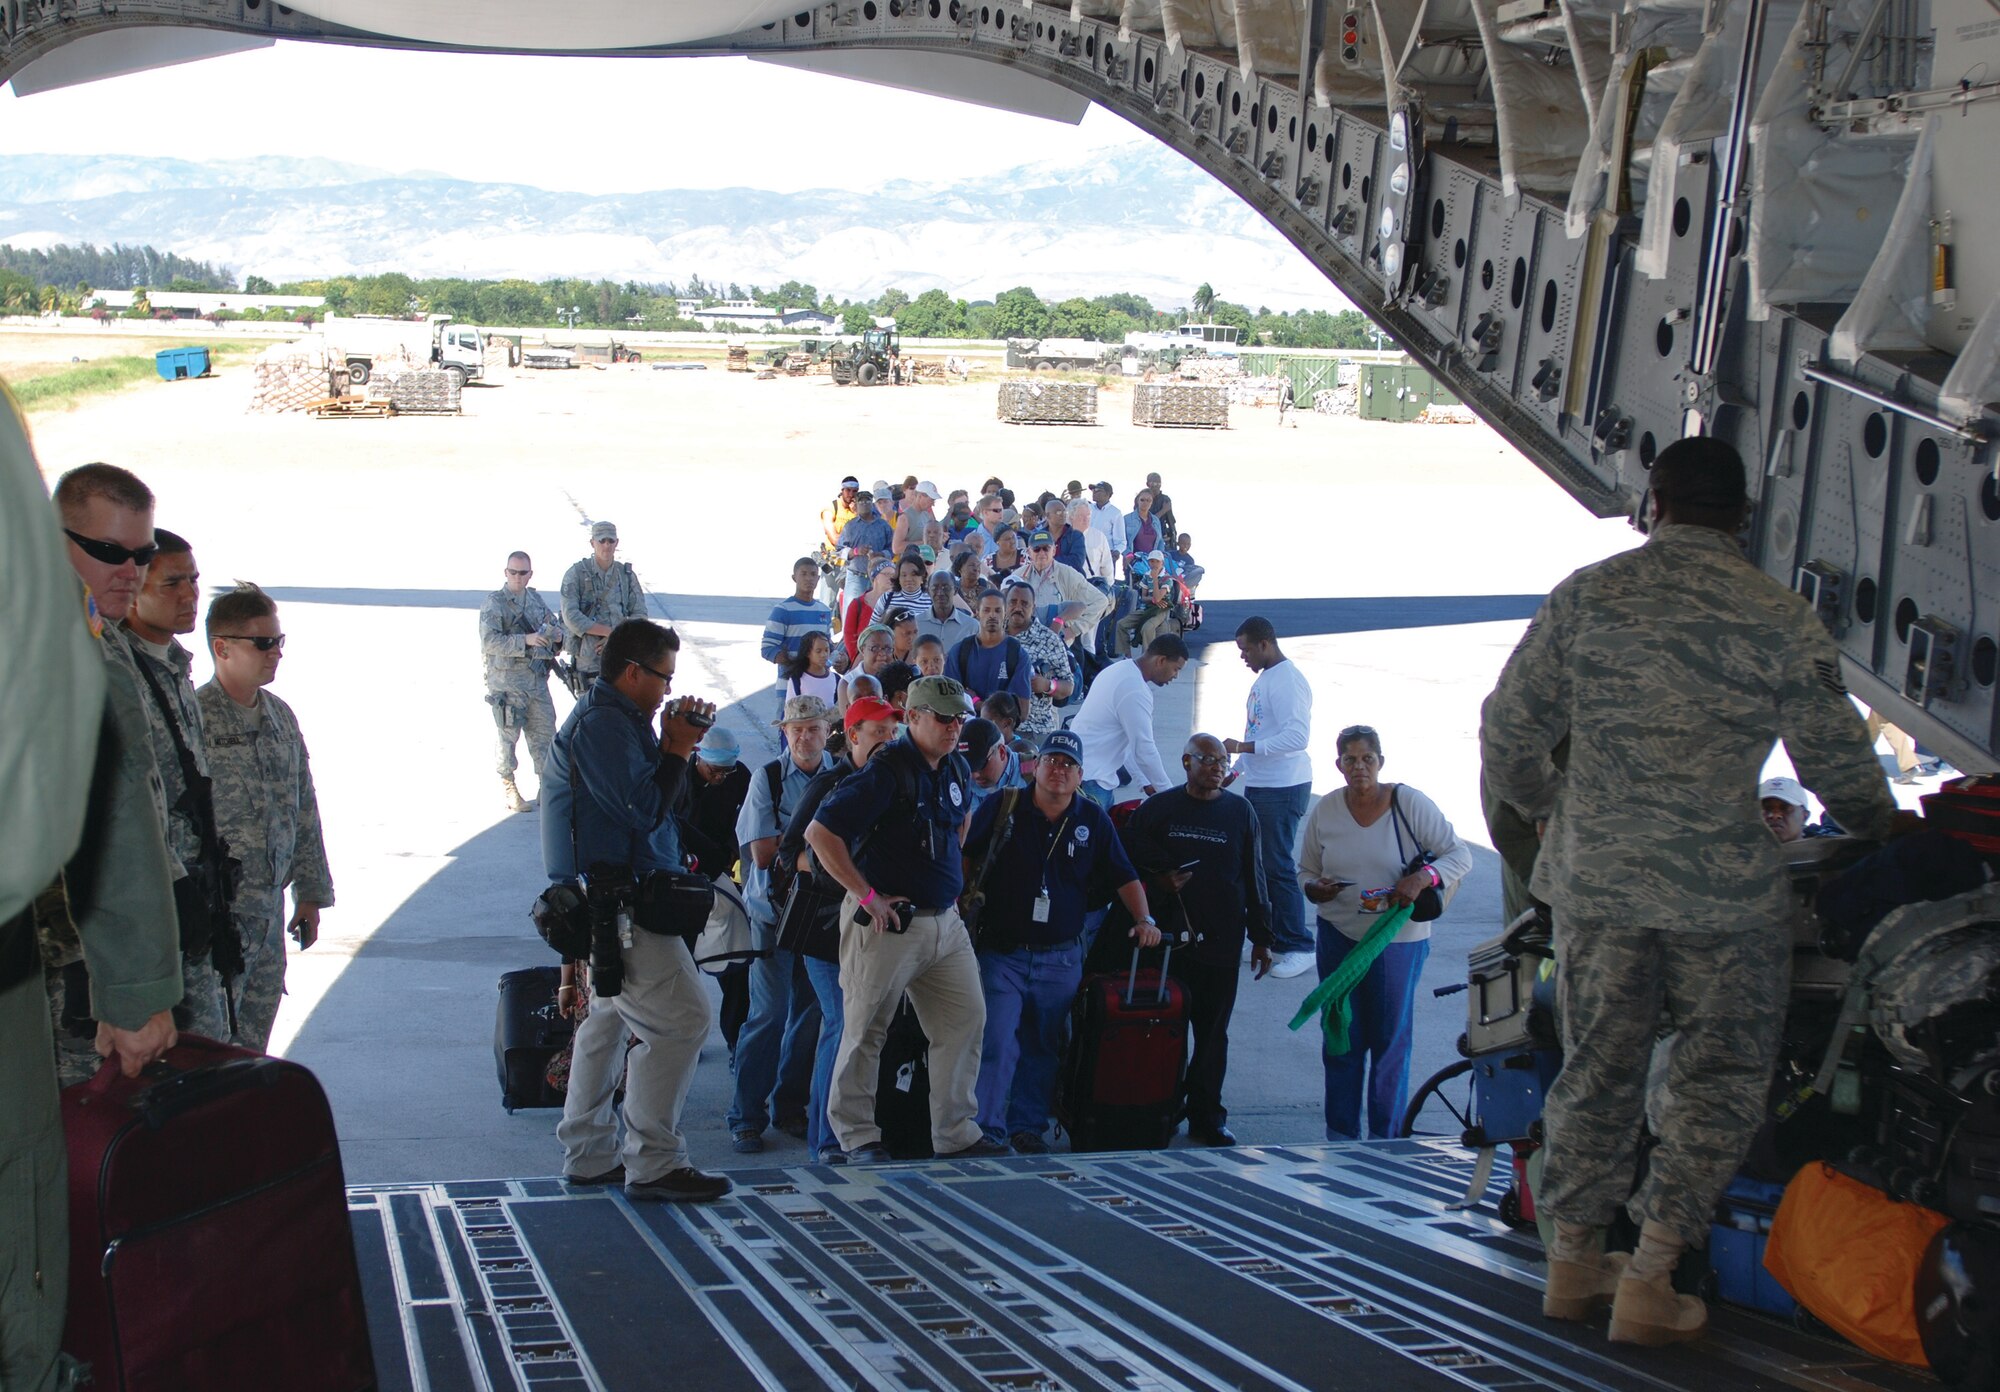 Aid workers and evacuees with U.S. passports and visas wait in line to board a C-17 Globemaster III from March Air Reserve Base in Port-au-Prince, Haiti, Jan. 29. The C-17 flew three missions as part of Operation UNIFIED RESPONSE into Haiti, before returning to March ARB, Feb. 1.  (U.S. Air Force Photo/Capt. Ashley Norris)